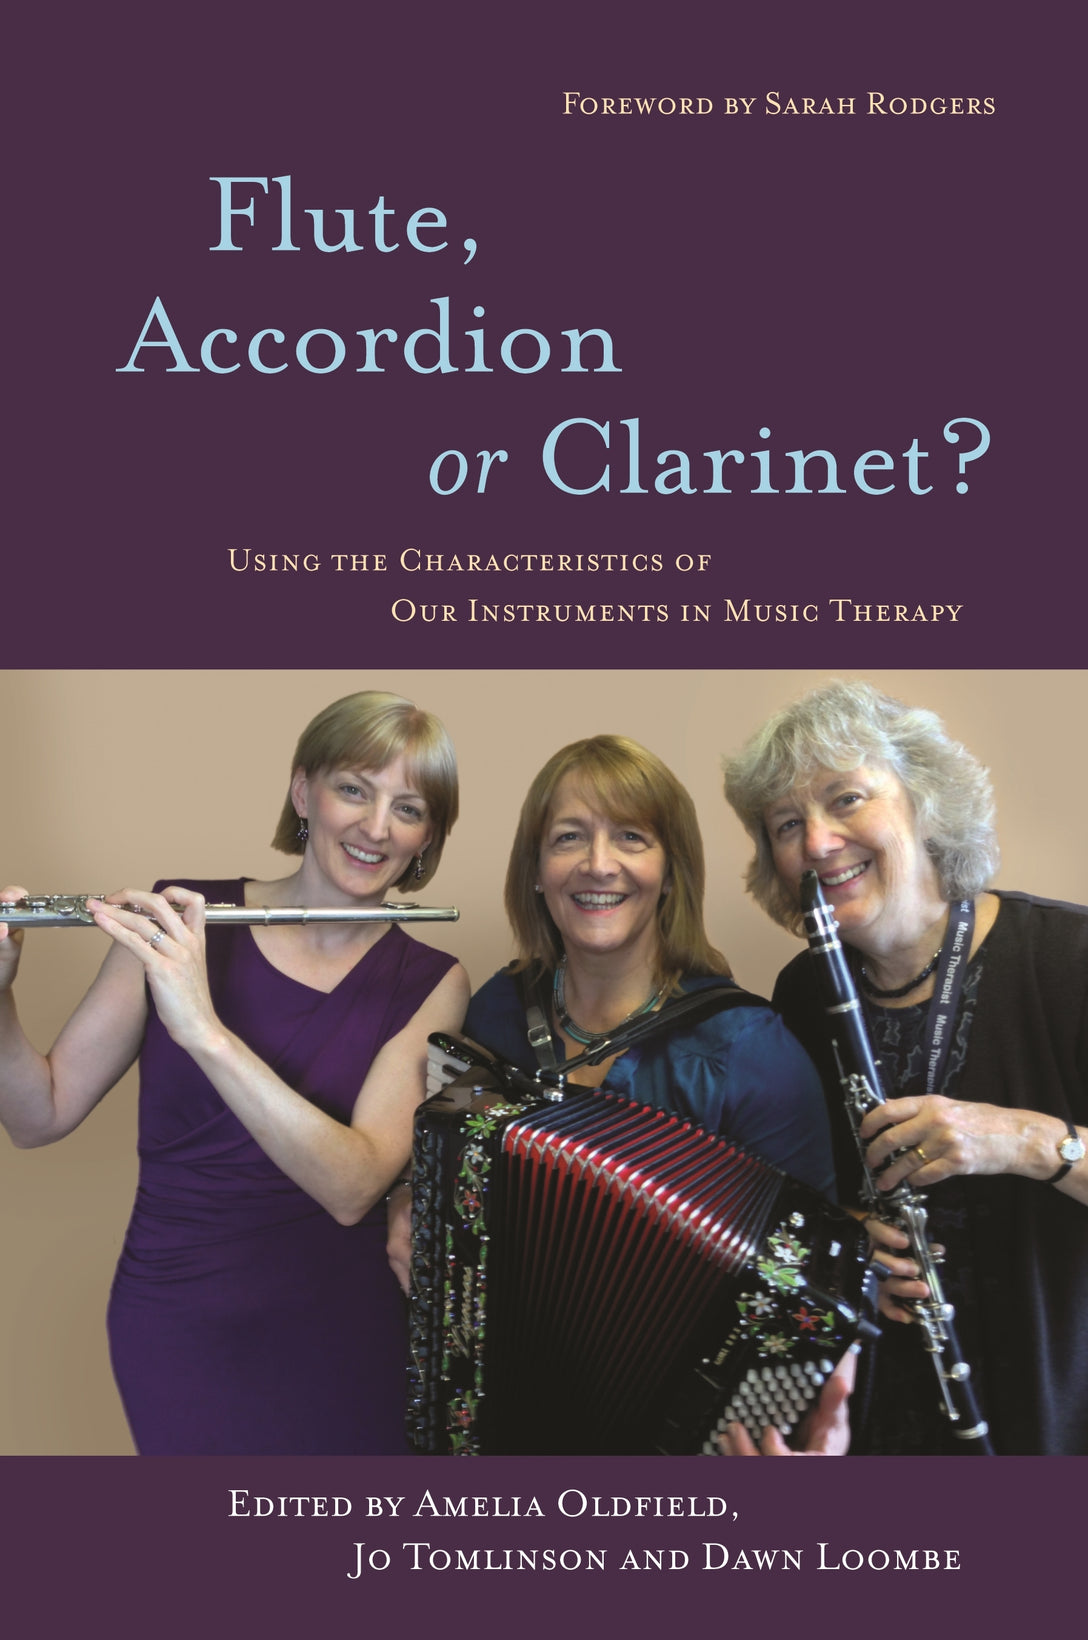 Flute, Accordion or Clarinet? by Dawn Loombe, Jo Tomlinson, Amelia Oldfield, Sarah Rodgers